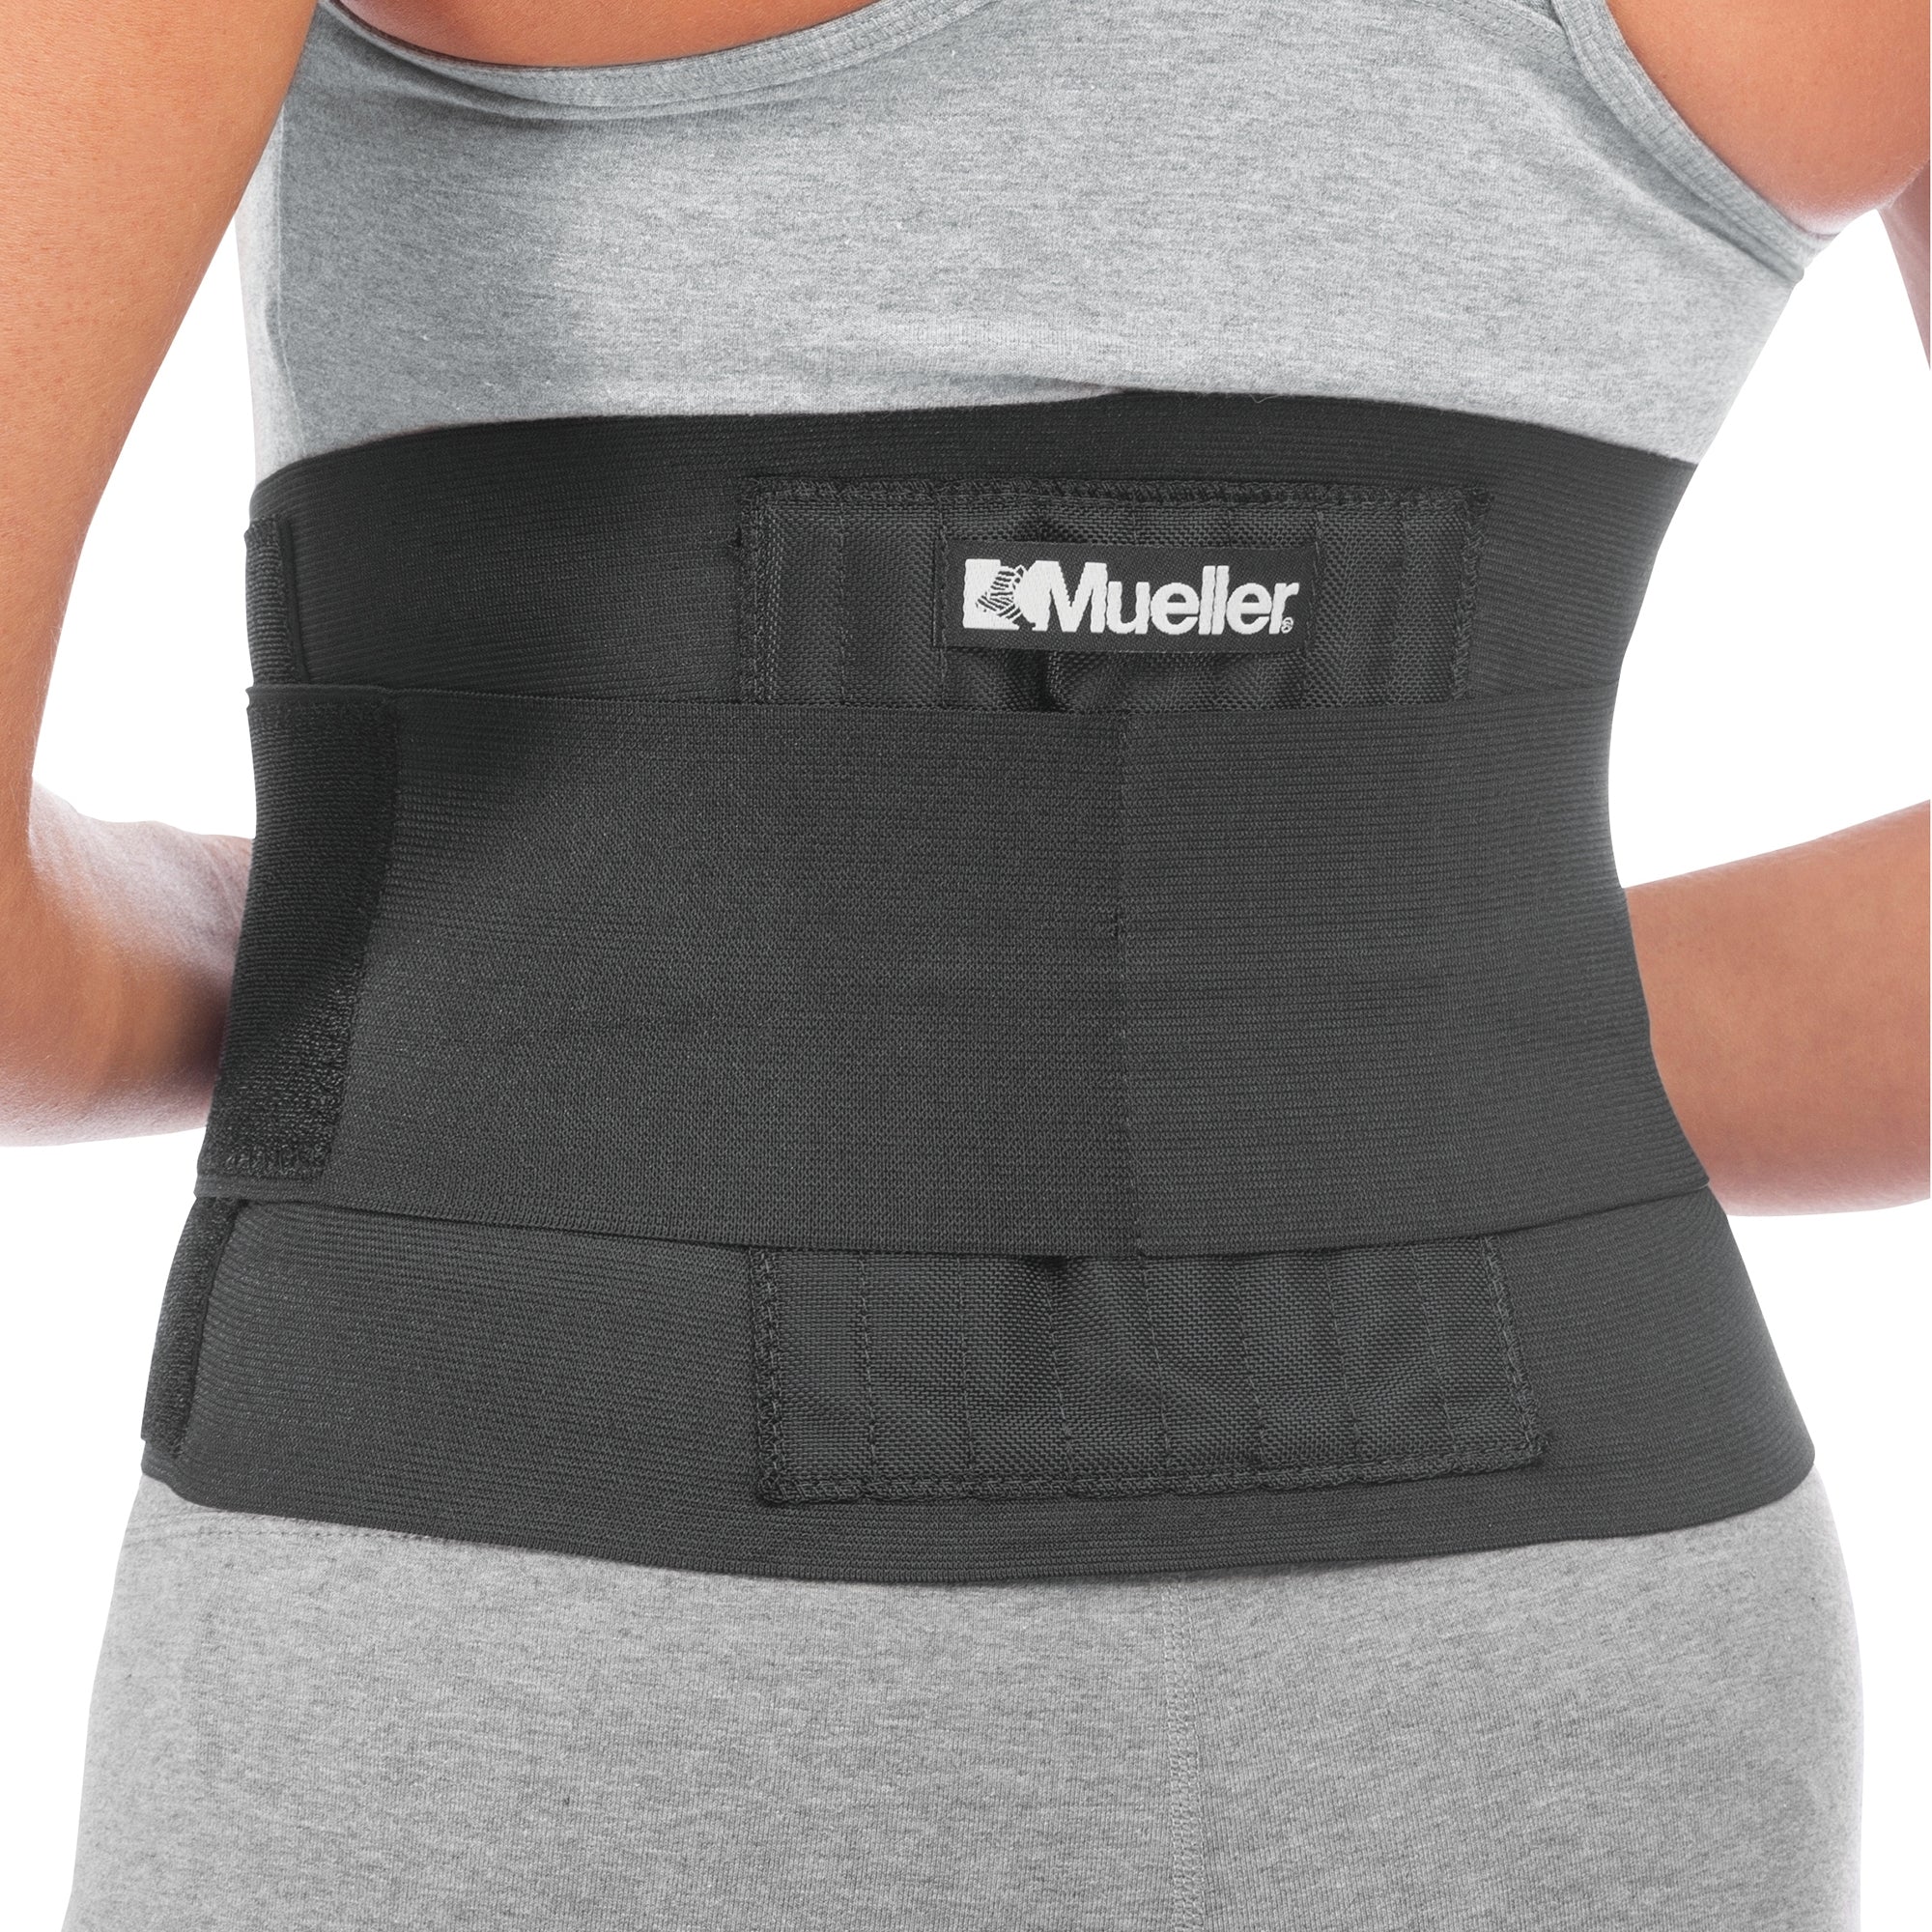 Back Brace Mueller® One Size Fits Most Hook and Loop Strap Closure 28 to 50 Inch Waist Circumference Adult